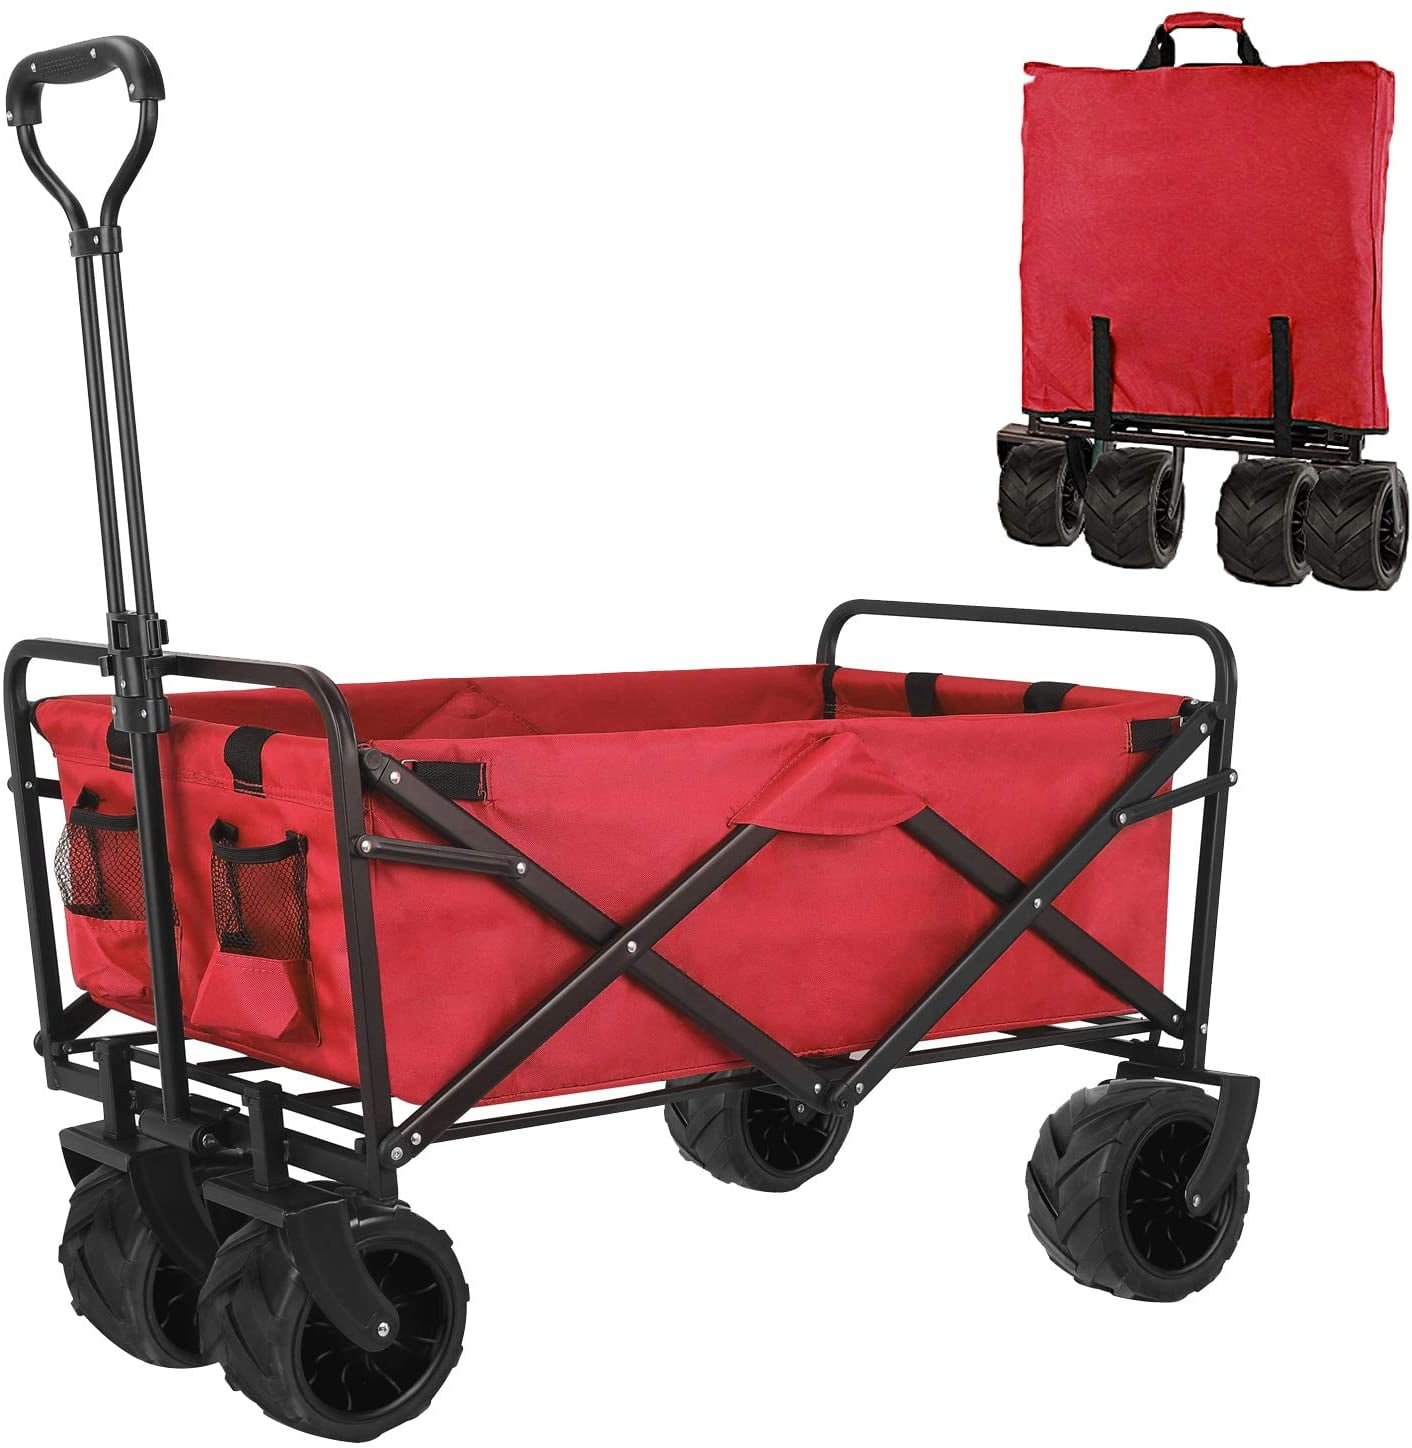 BAHOM Folding Collapsible Outdoor Utility Wagon Cart, Heavy Duty Garden  Cart with All-Terrain Wheels and Carrying Bag ,Red